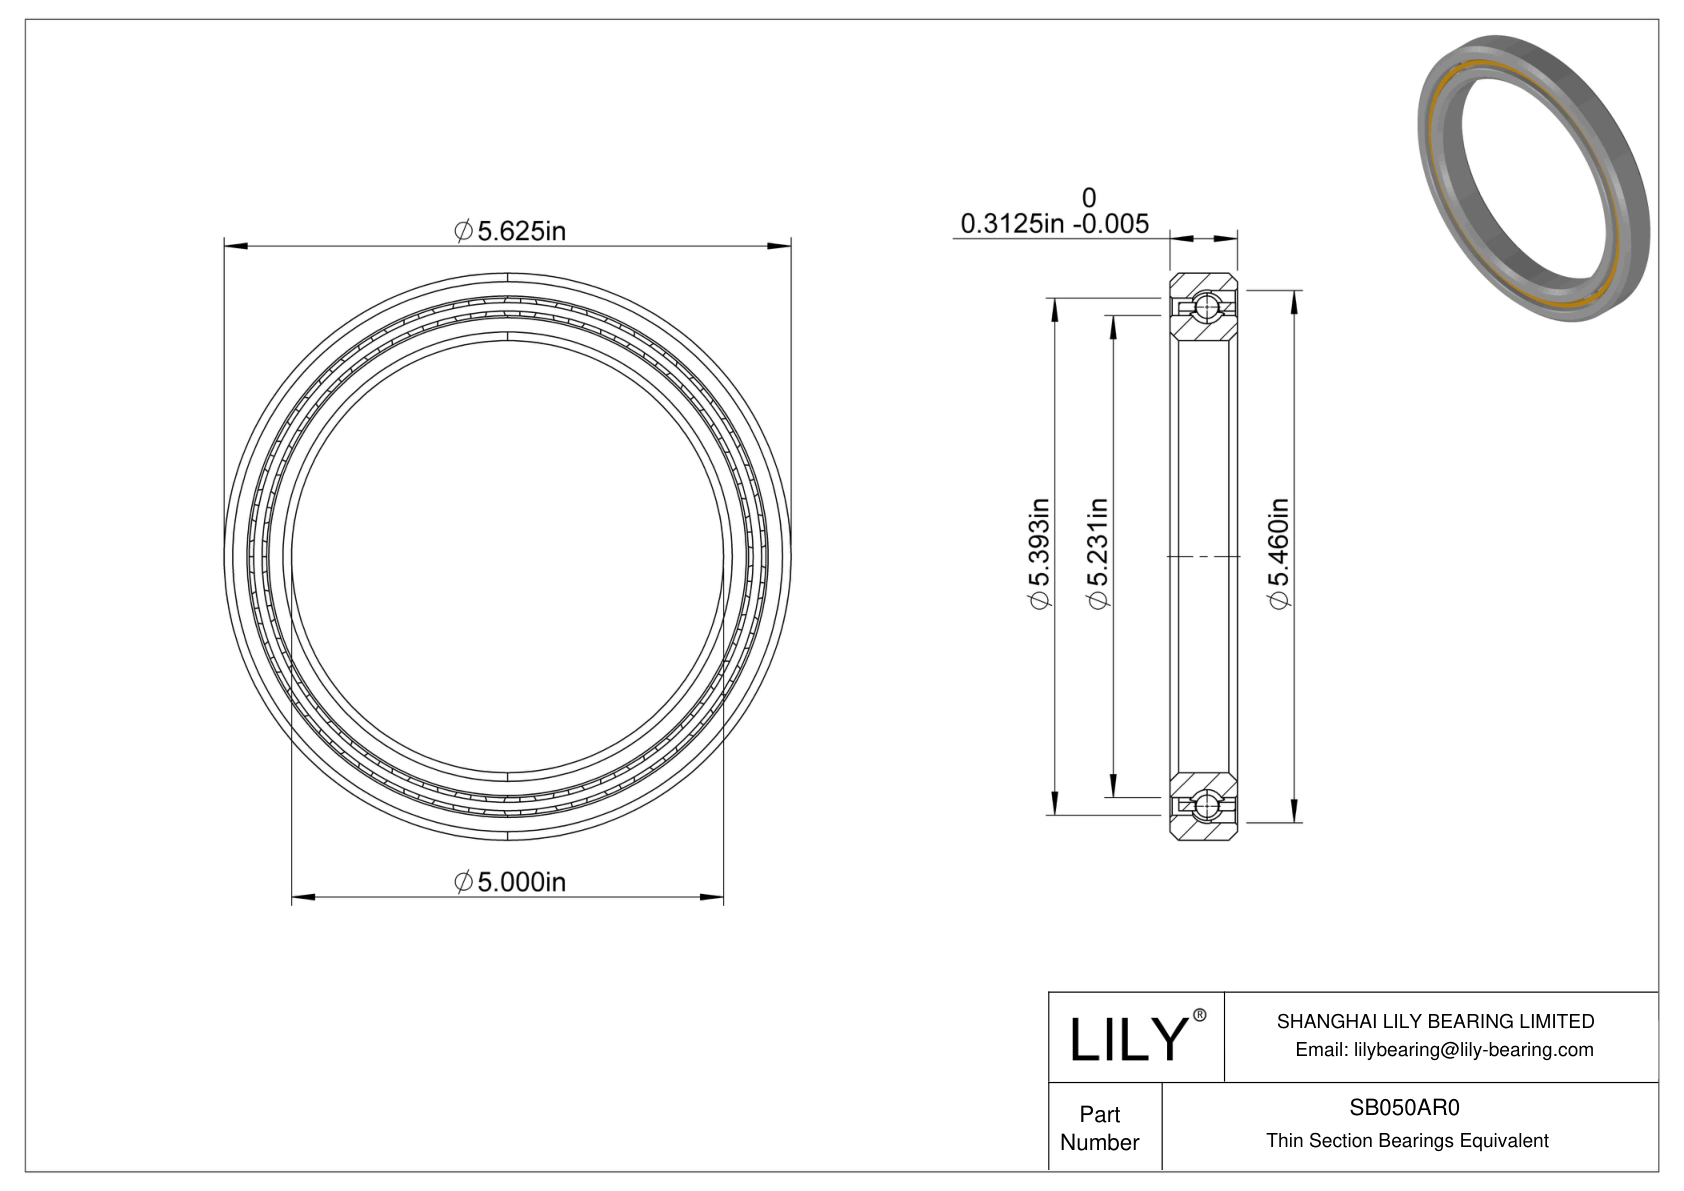 SB050AR0 Constant Section (CS) Bearings cad drawing